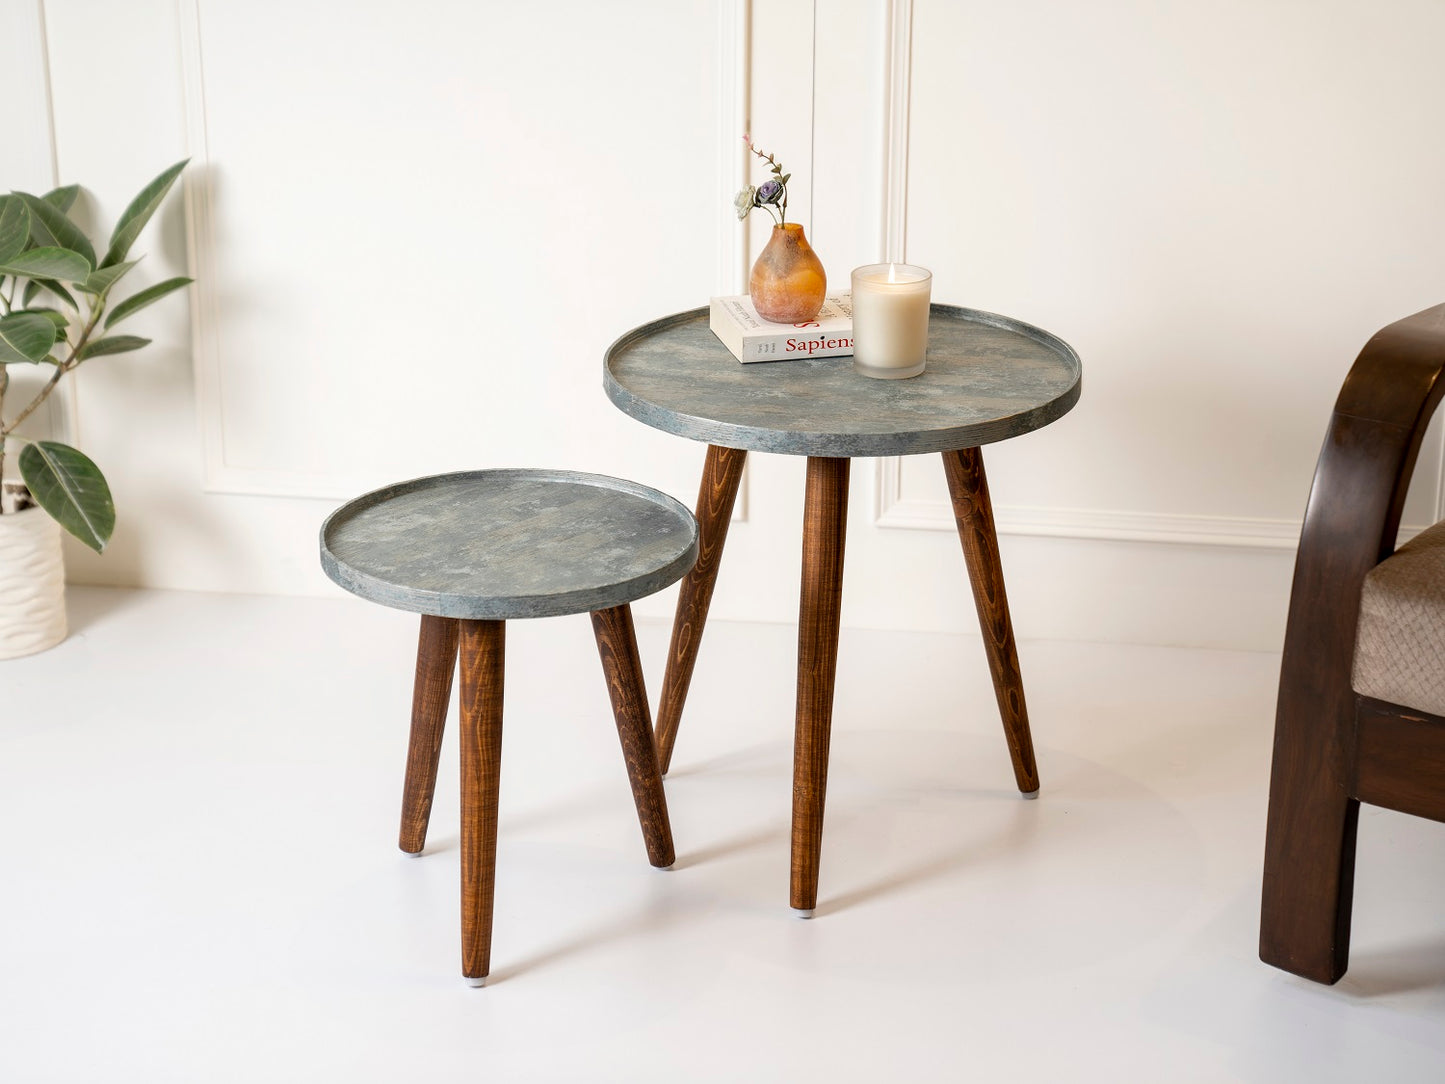 Teal Rain Round Nesting Tables with Wooden Legs, Side Tables, Wooden Tables, Living Room Decor by A Tiny Mistake